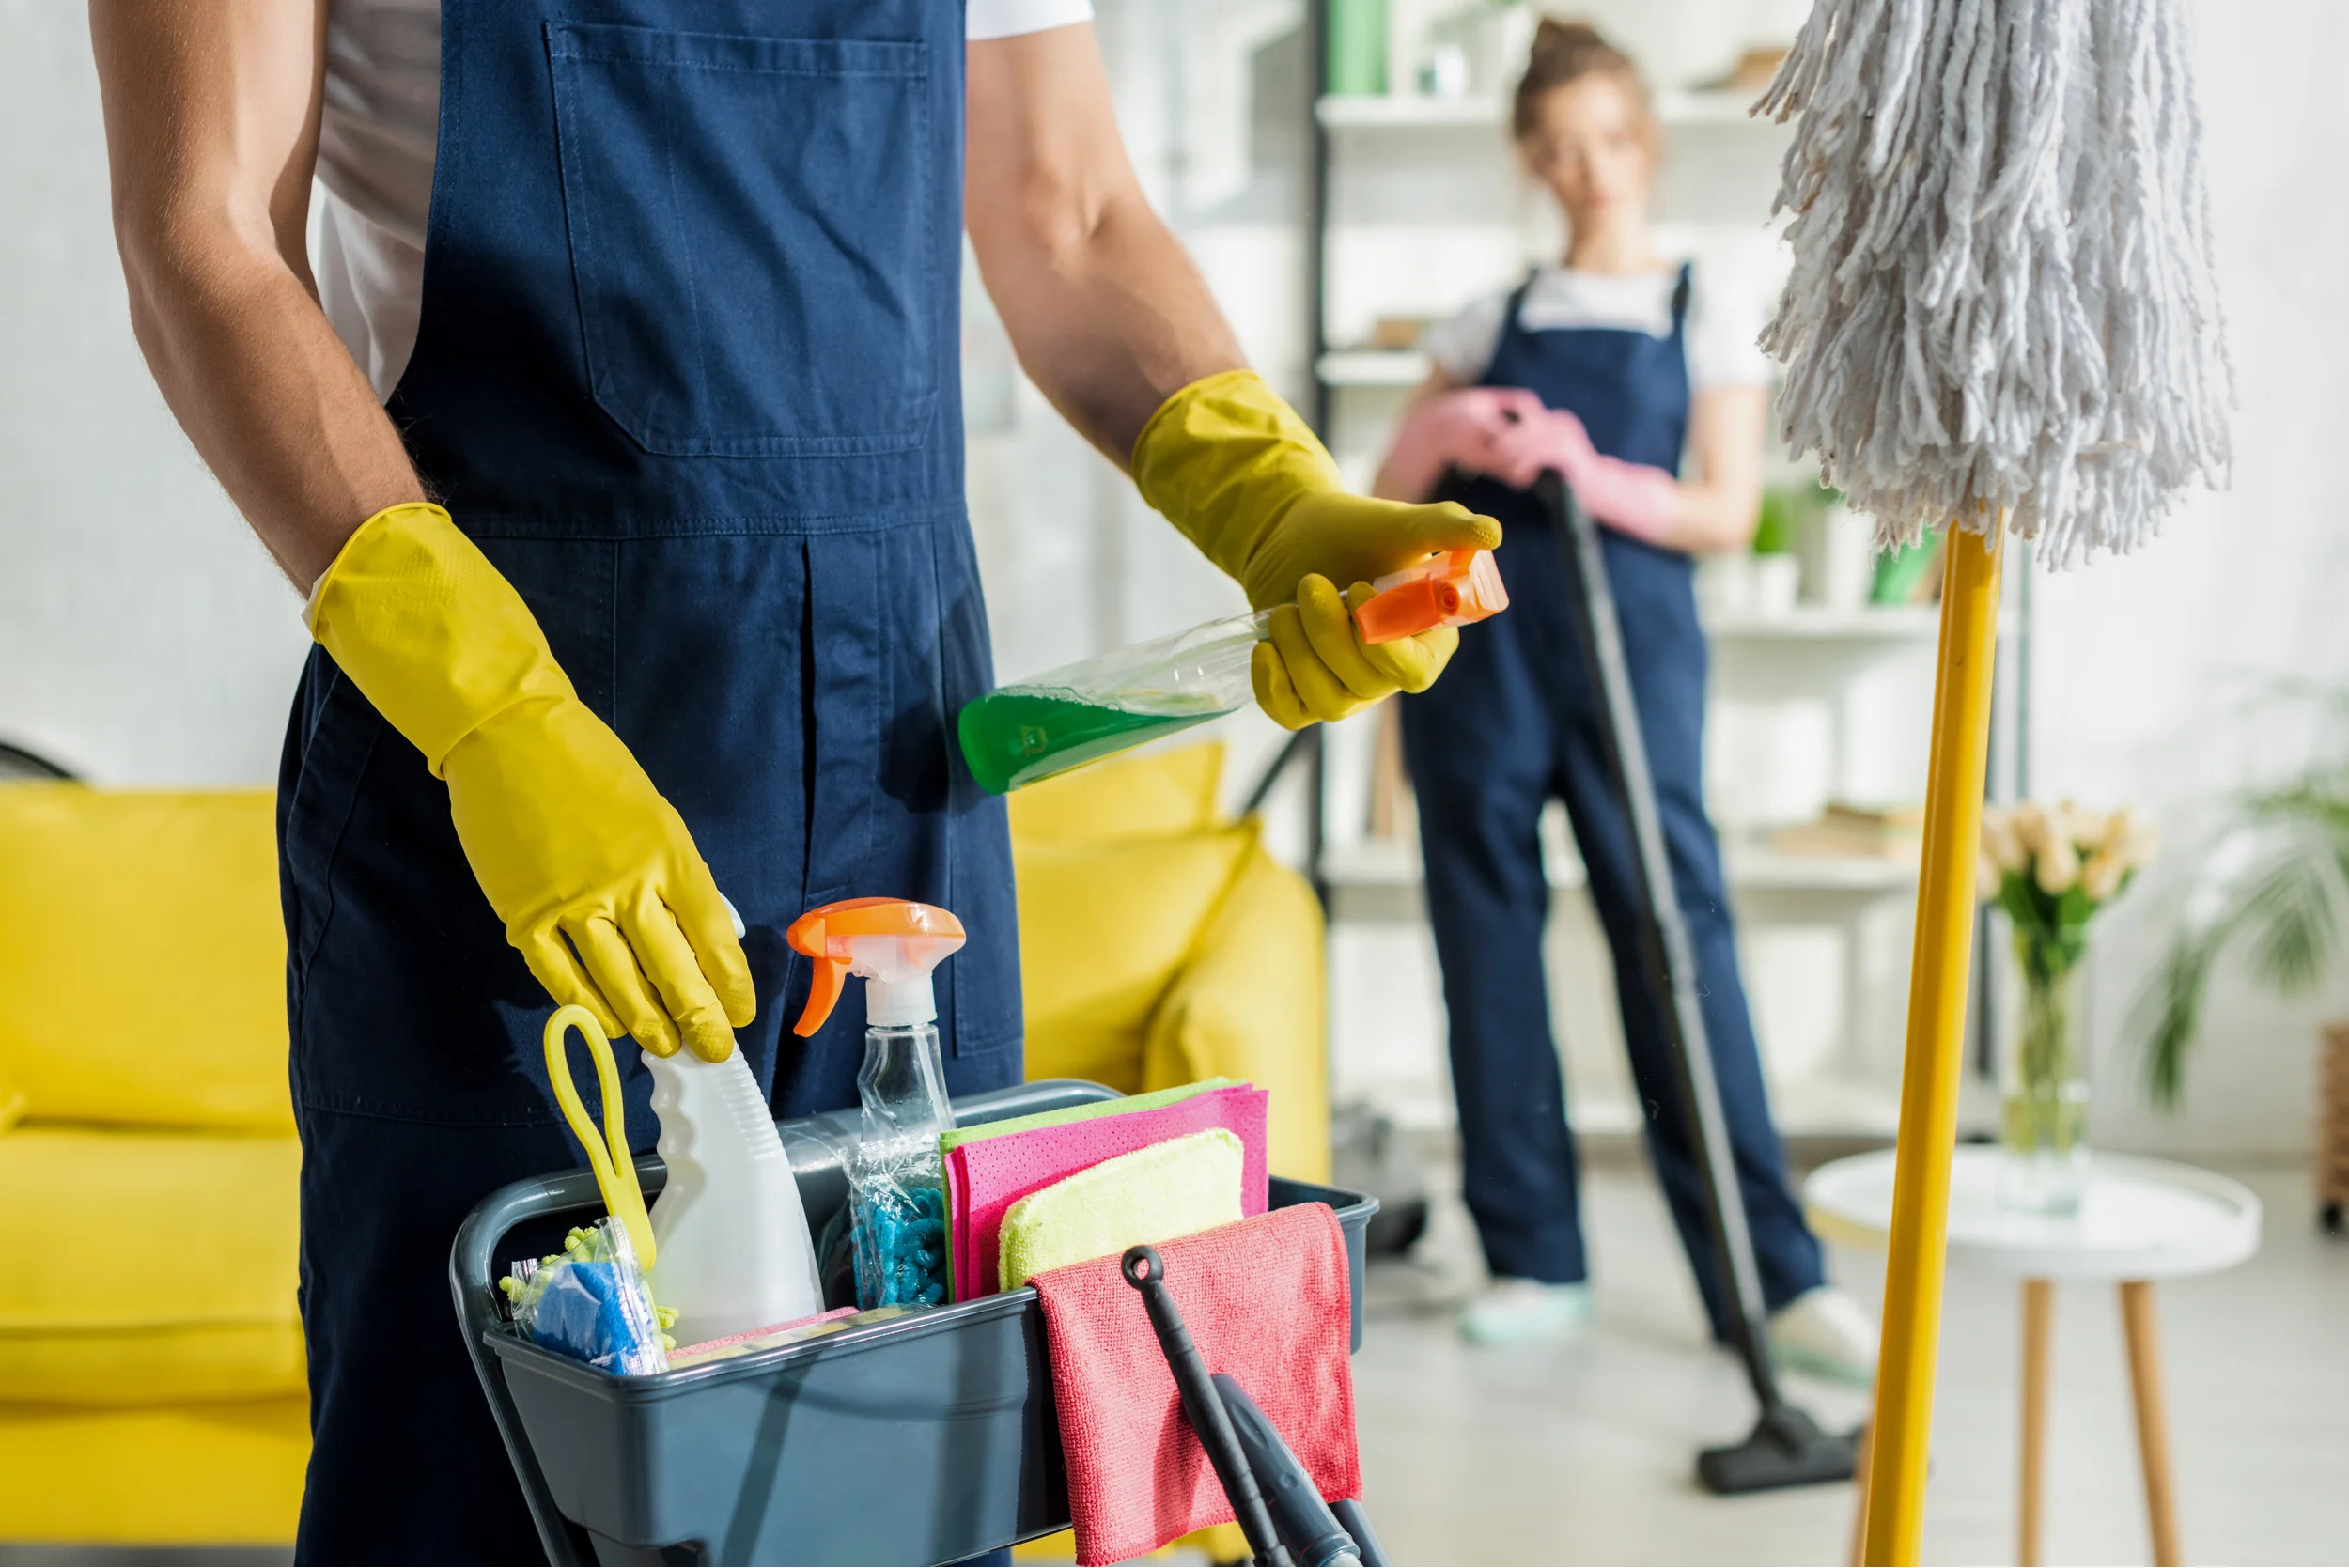 Two people in overalls and cleaning supplies. Star Clean Ltd, Cleaning, Cleaners, Commercial Cleaners, Domestic Cleaners. Bath, Bristol